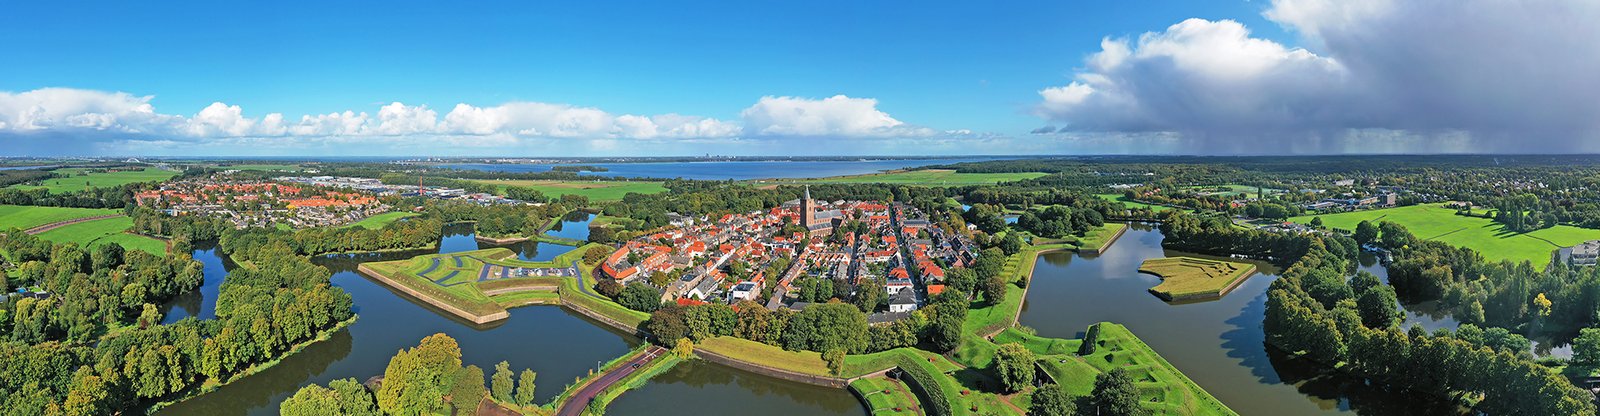 Things to do in Naarden The Netherlands